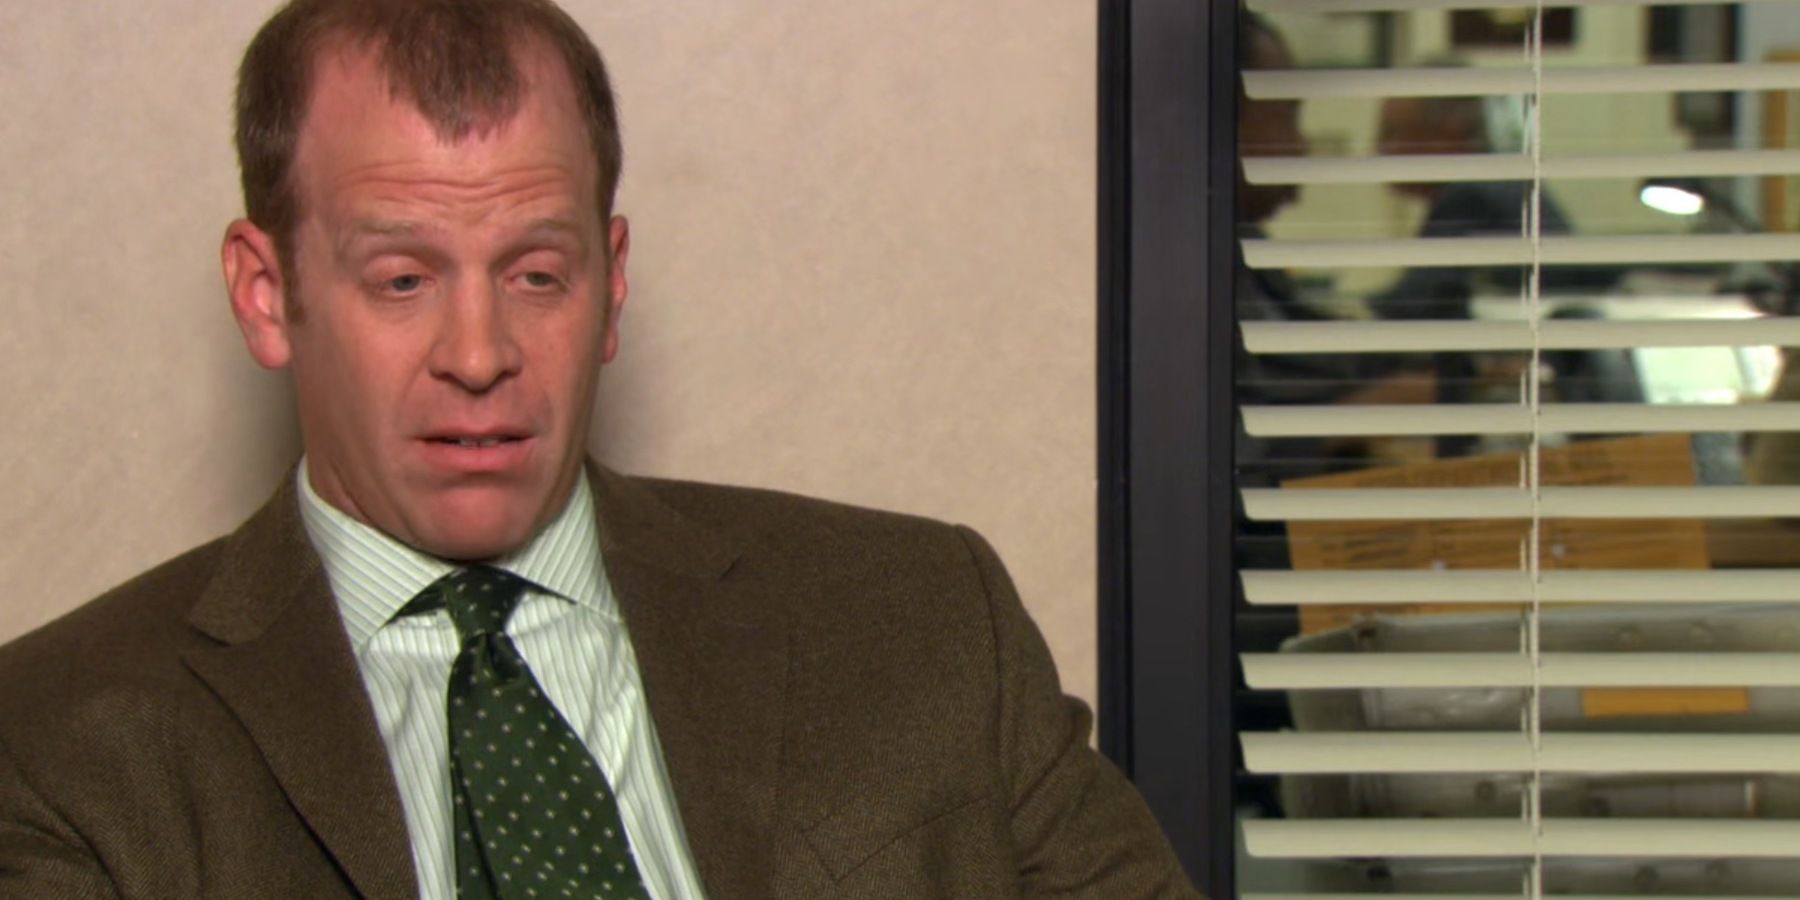 The Office Toby complained to Ryan about Jim